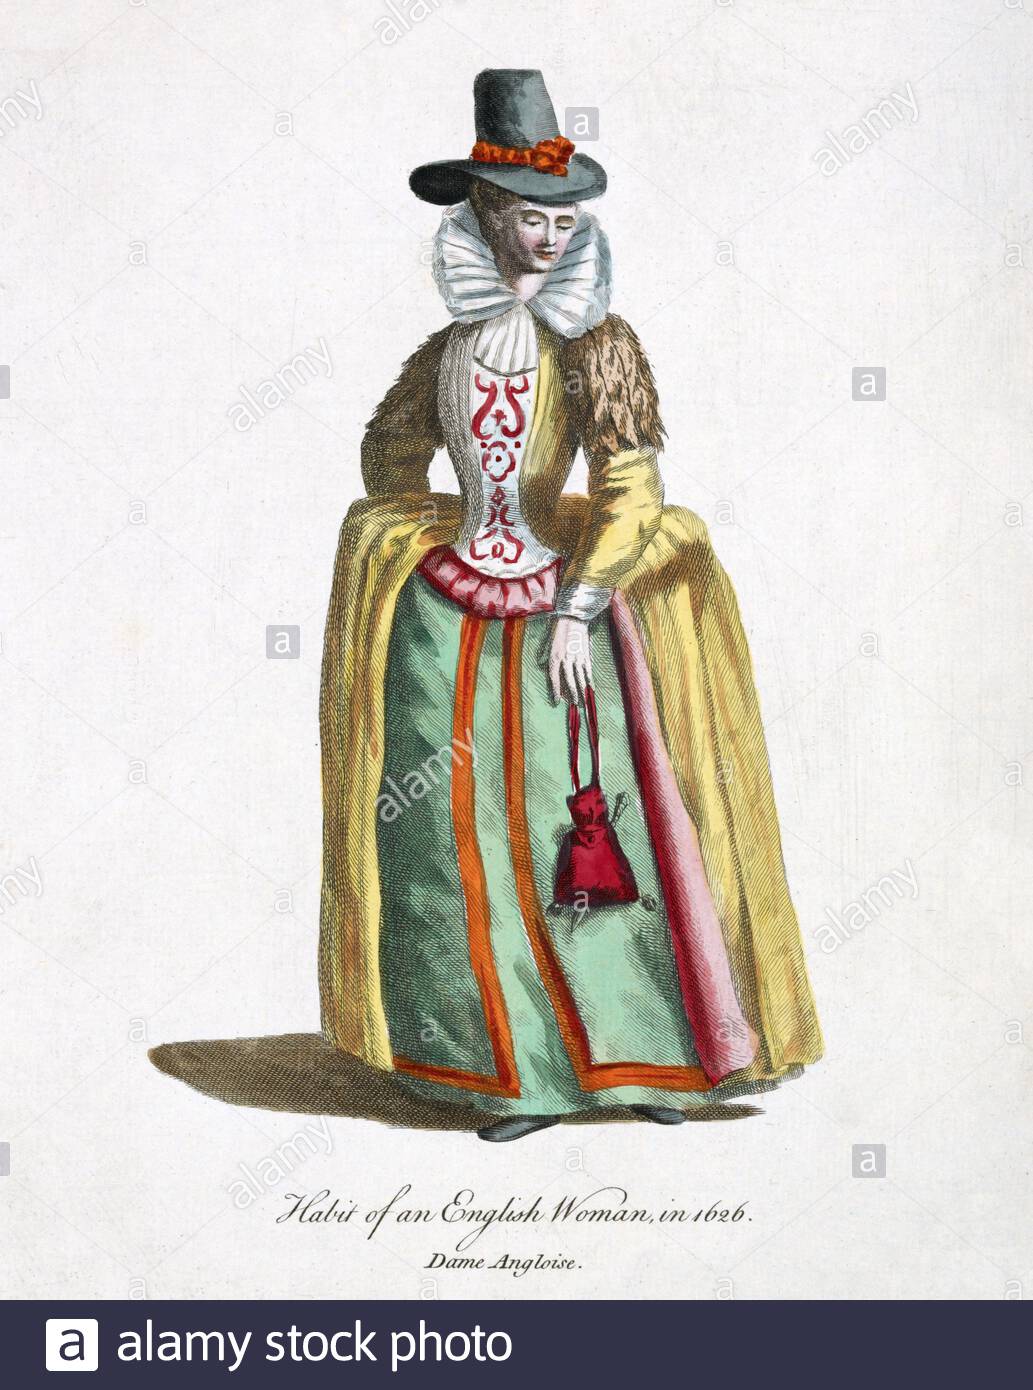 Habit of an English woman in 1626, vintage illustration from the 1700s Stock Photo